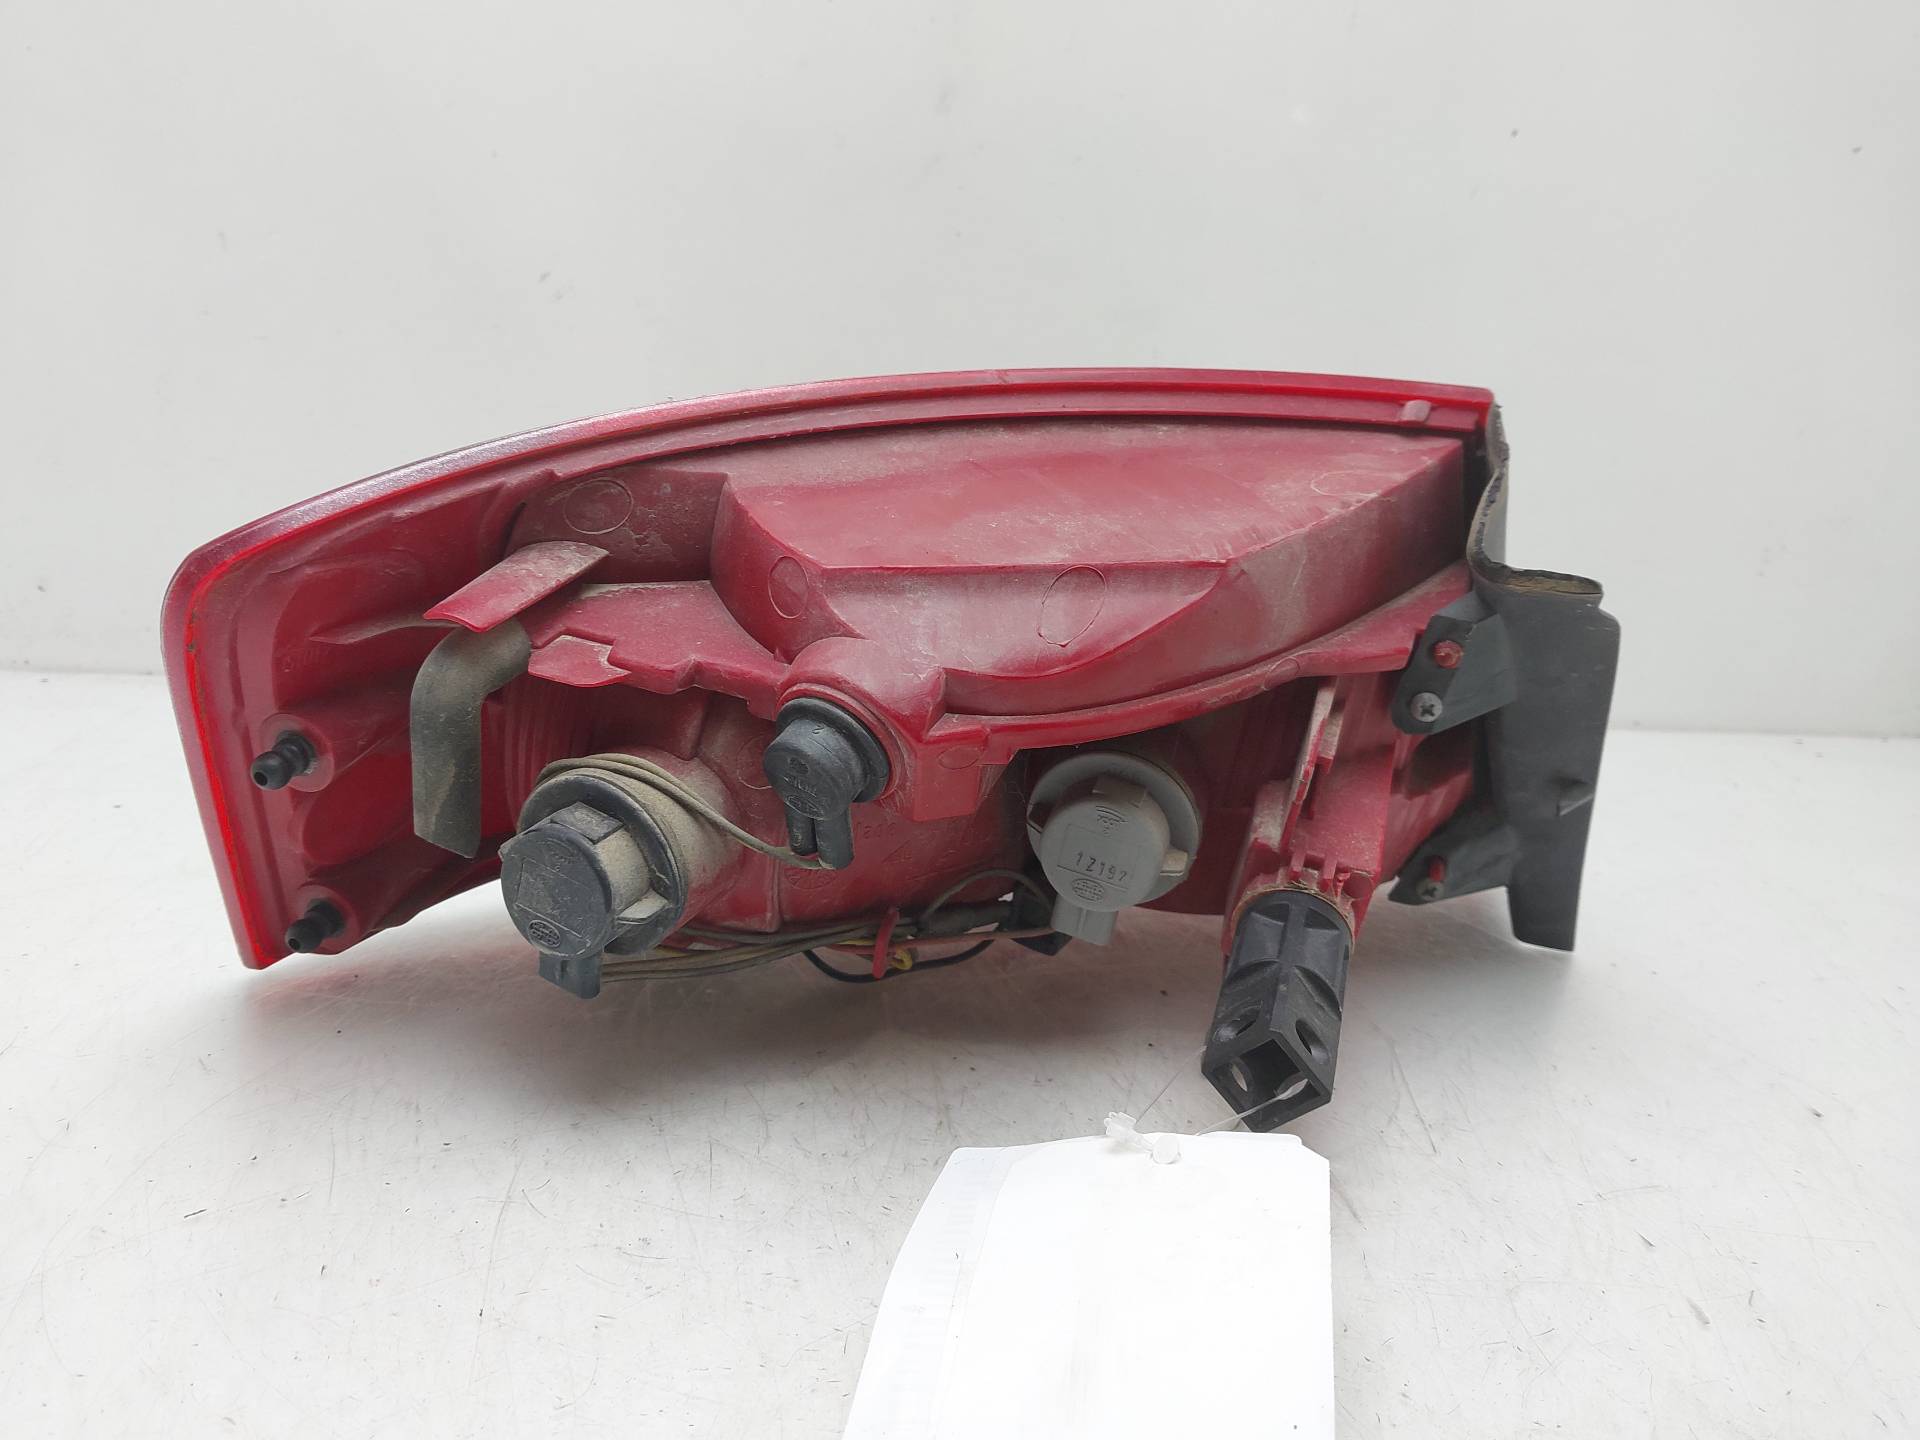 AUDI A5 8T (2007-2016) Rear Right Taillight Lamp 8T0945096 24148039